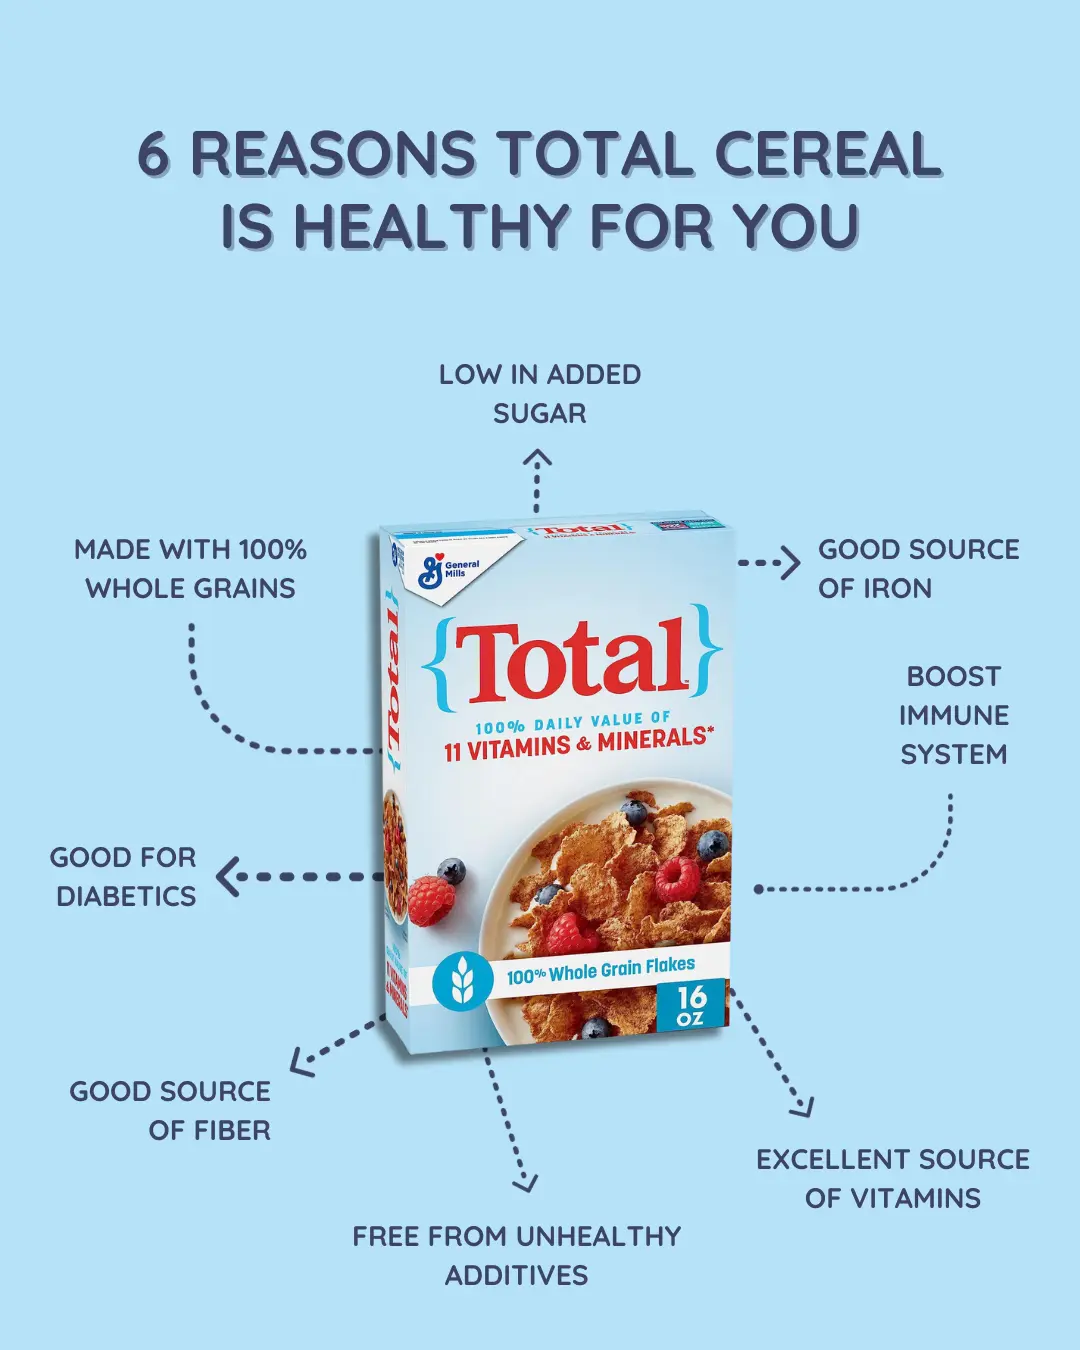 6 reasons total cereal is healthy for you